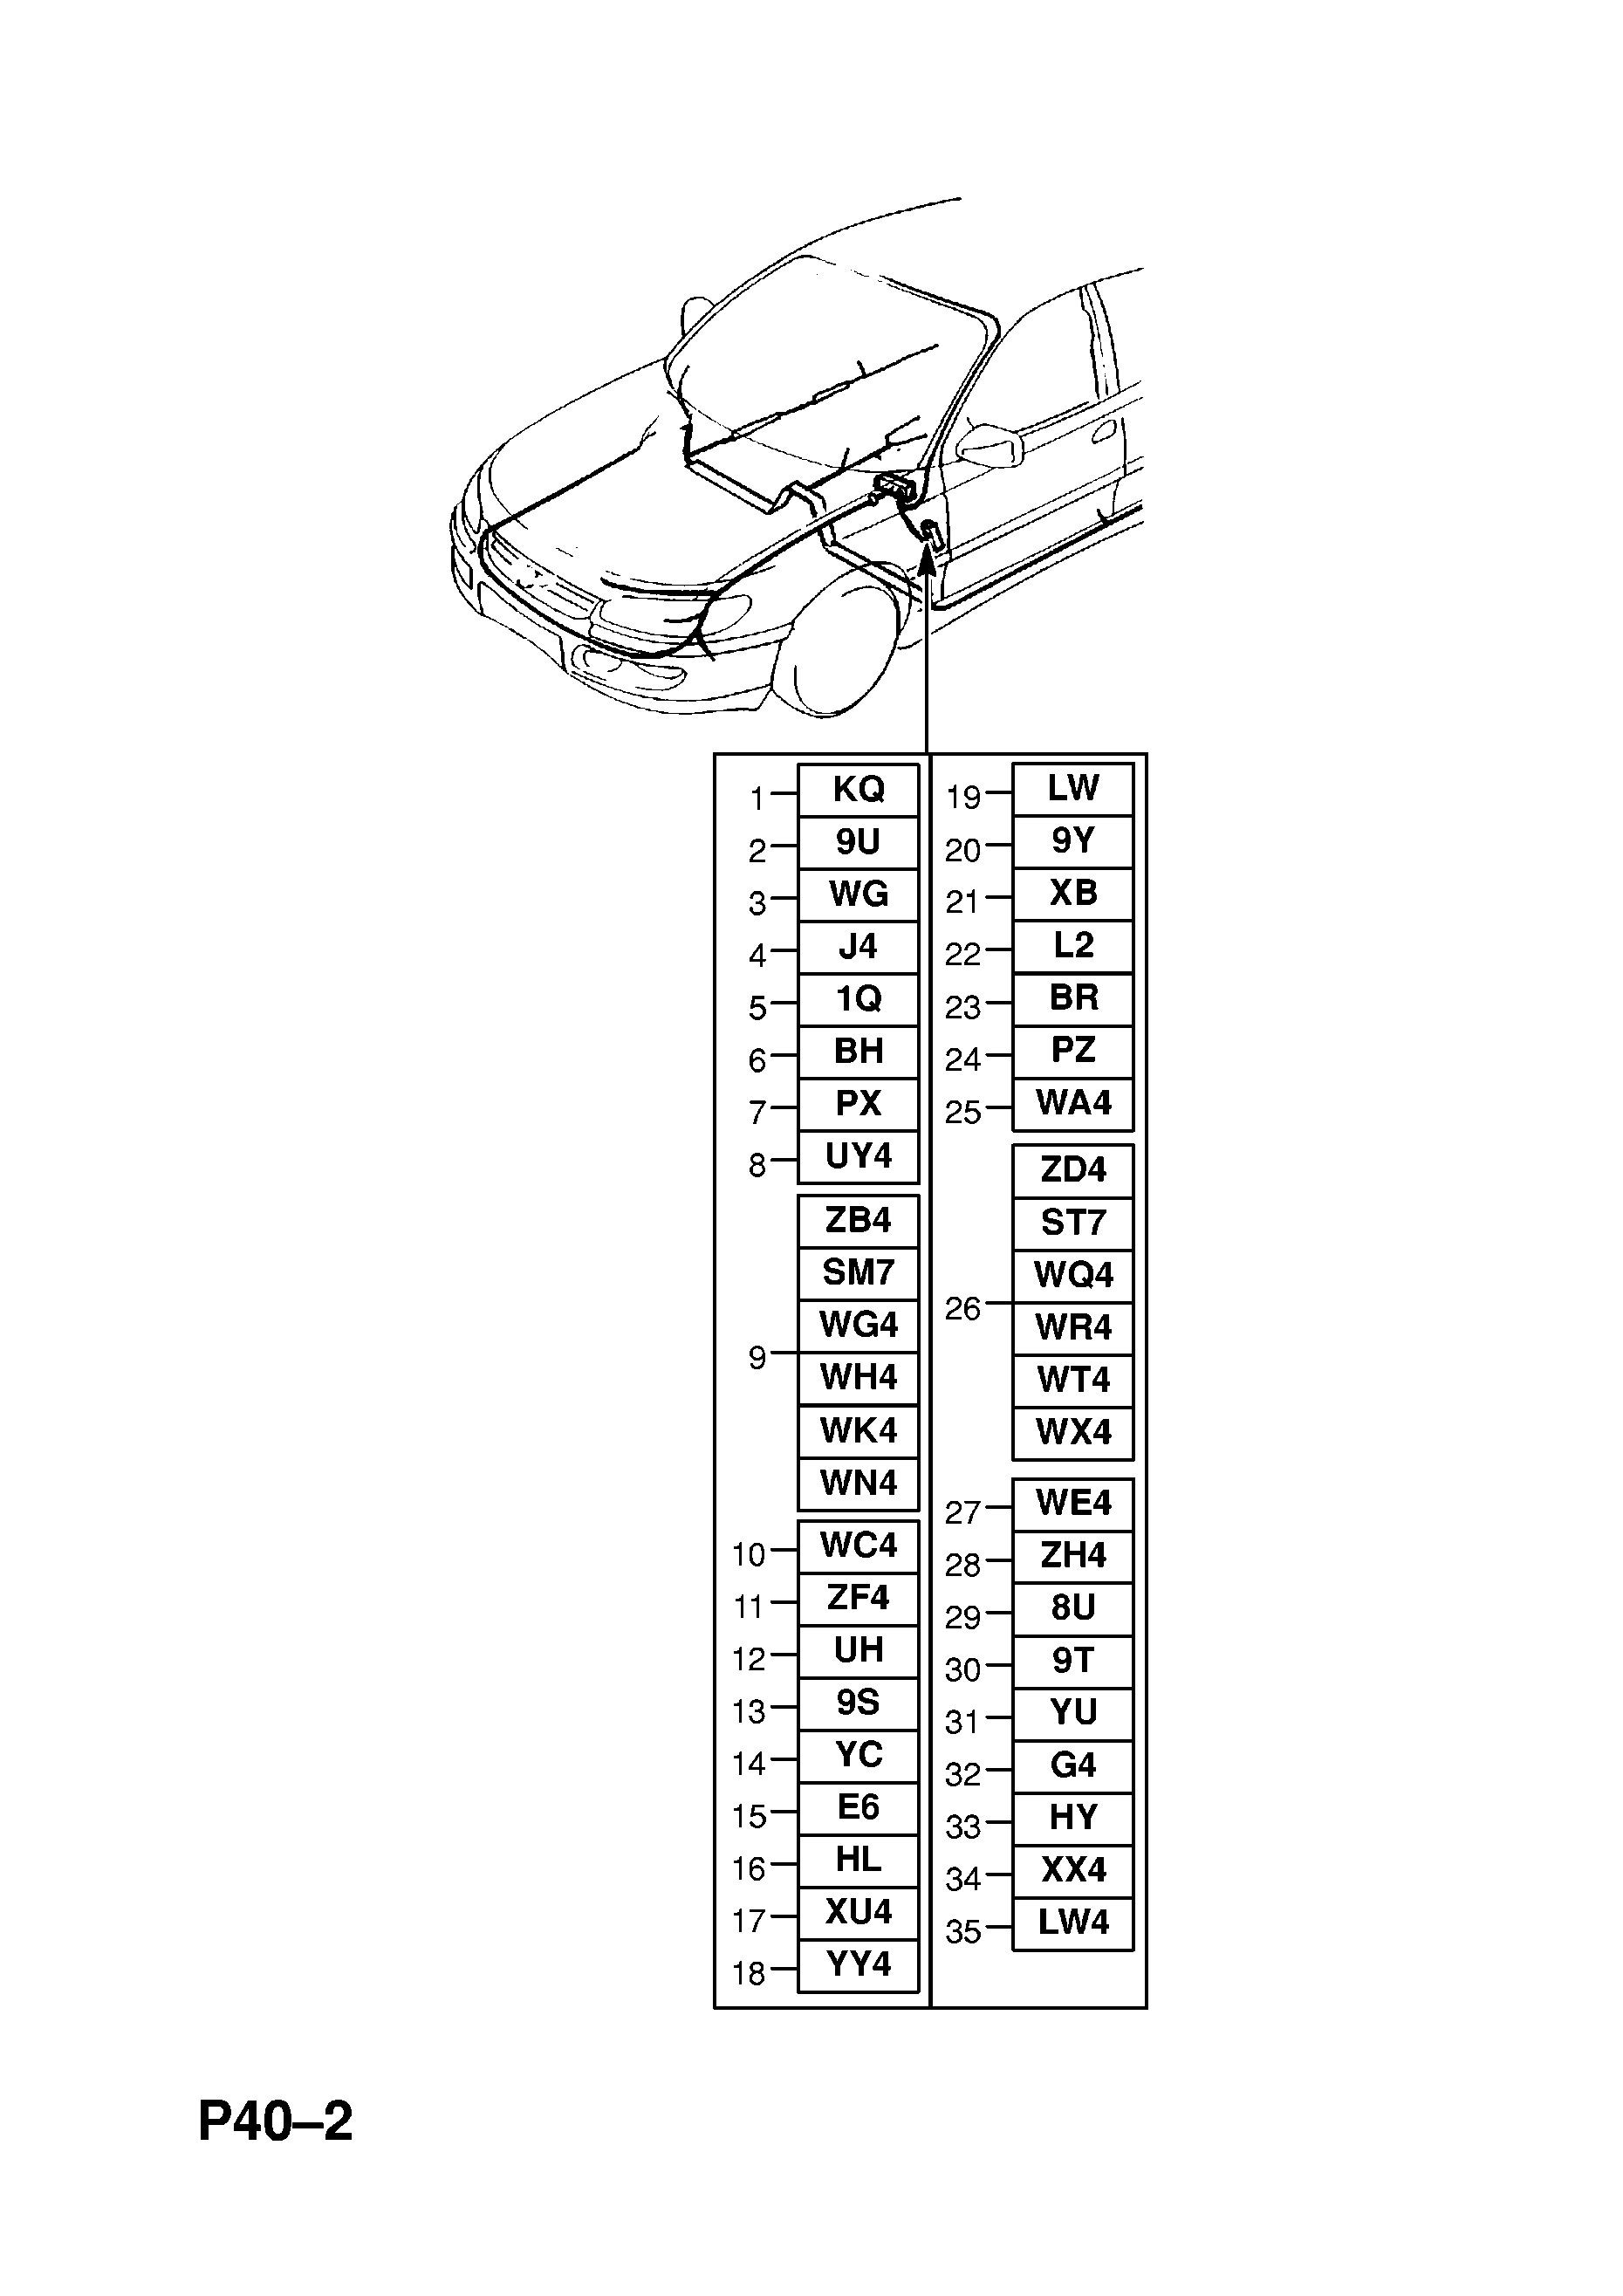 BODY WIRING HARNESS (CONTD.) <small><i>[U25TD[L93],X25TD[L93] ENGINES USED WITH HEATED REAR SEAT AND MULTI-FUNCTION DISPLAY USED WITH ELECTRIC SEATS WITH MEMORY -X1999999]</i></small>